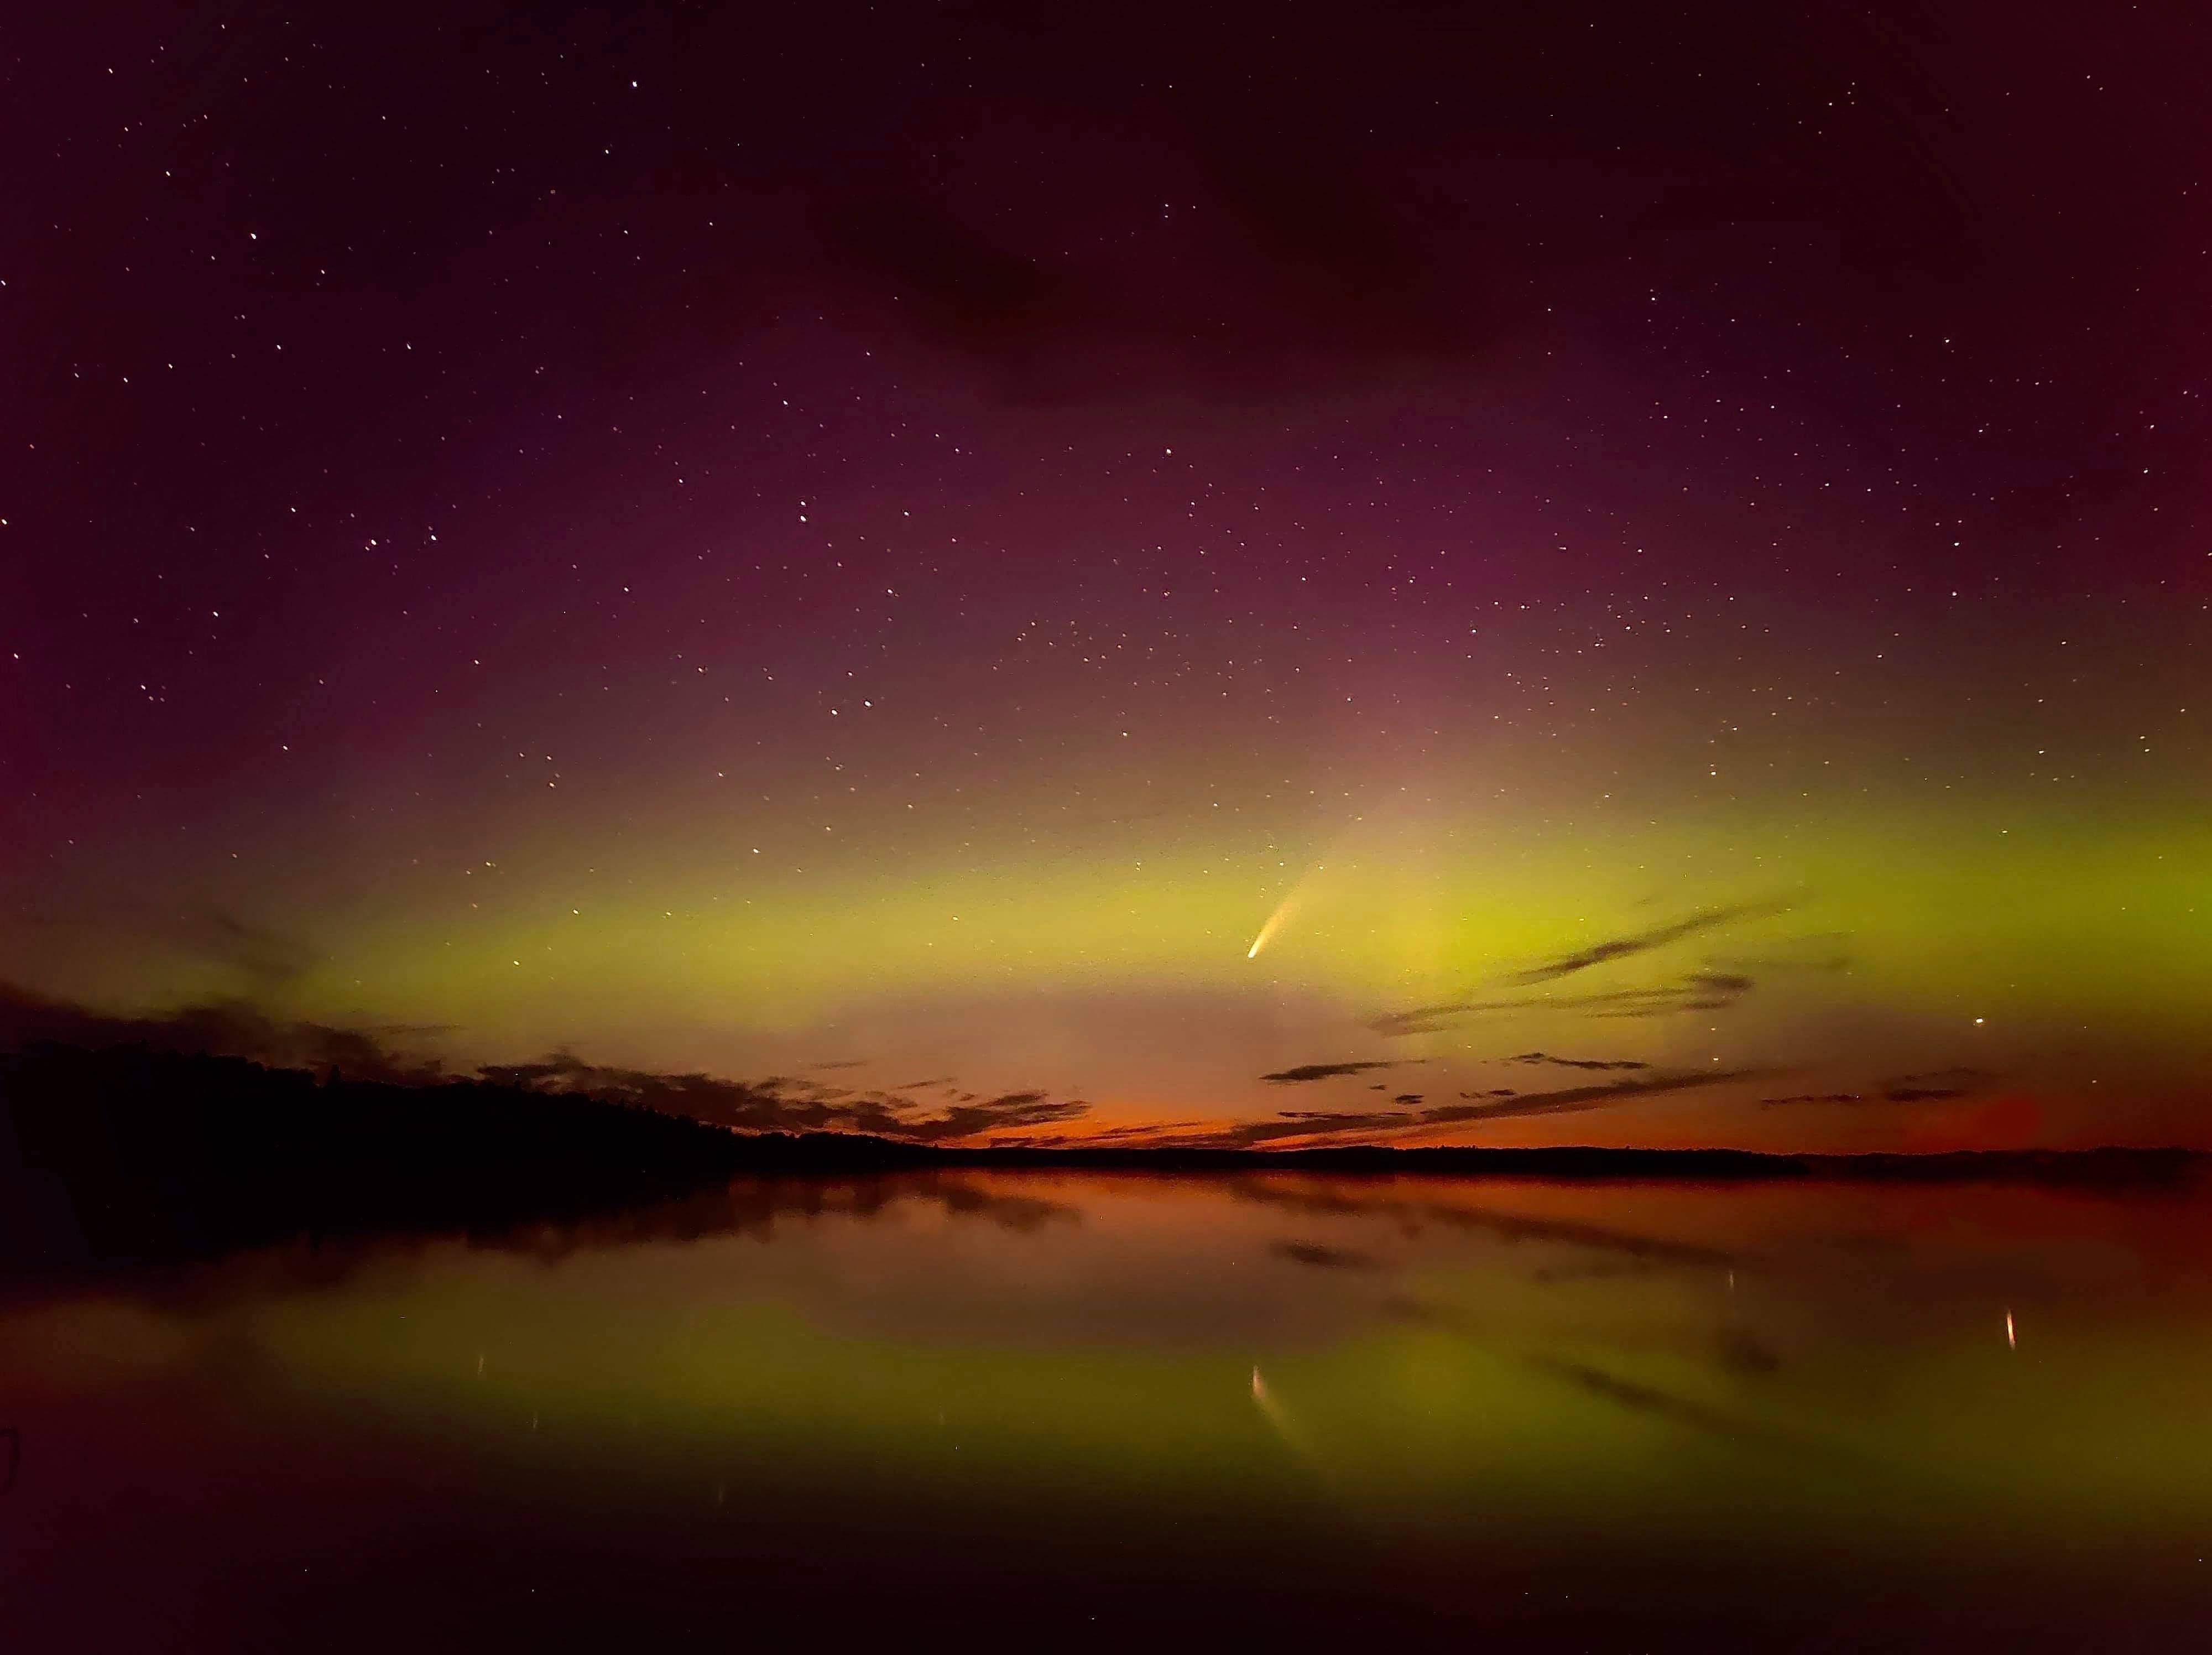 Northern lights and comet visible at Ivanhoe